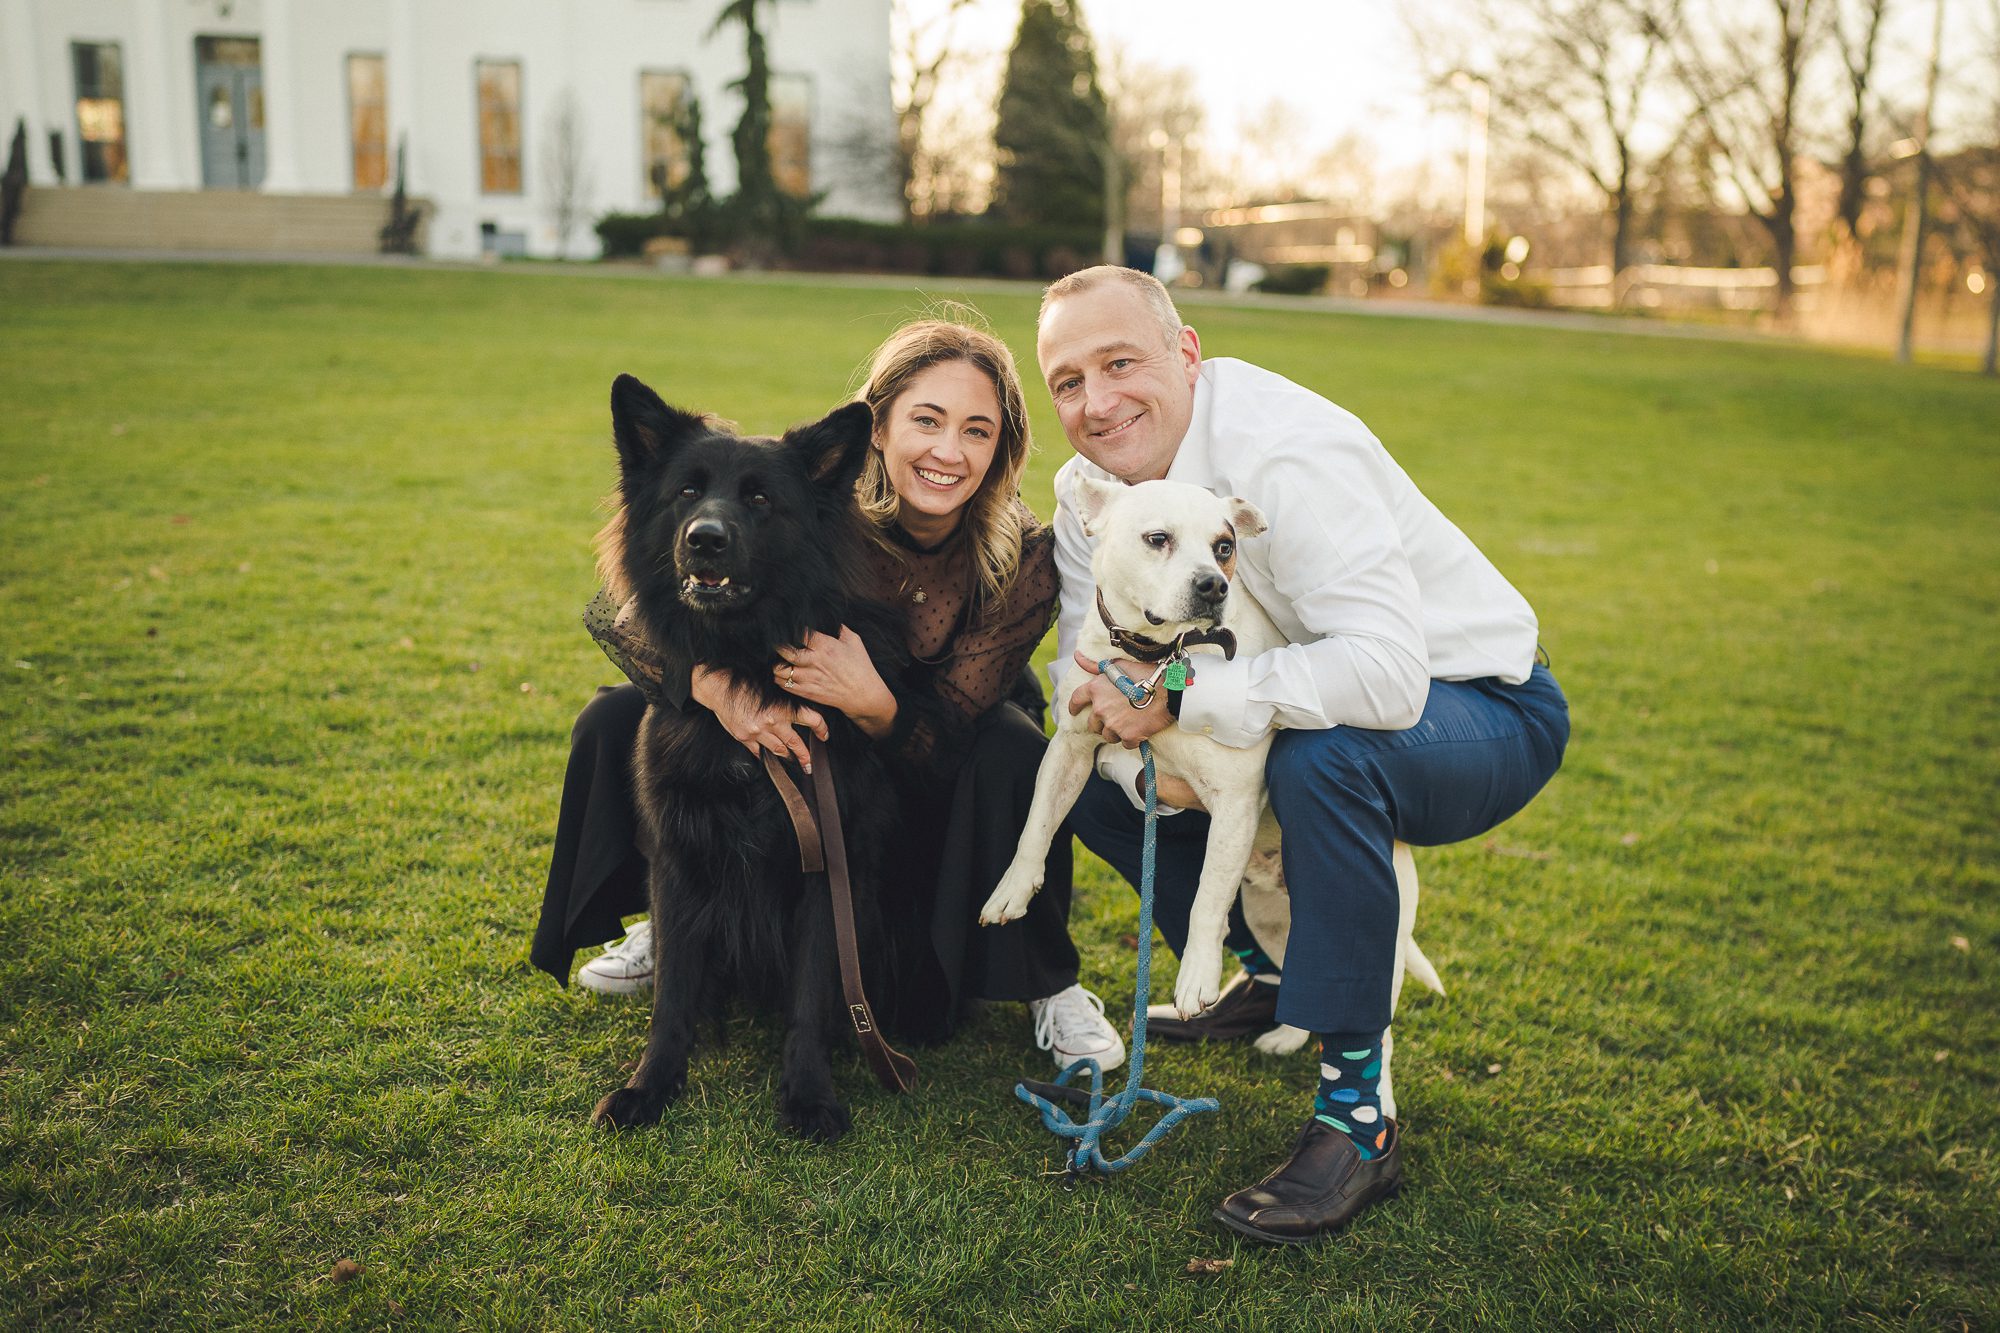 engagement session with your dogs